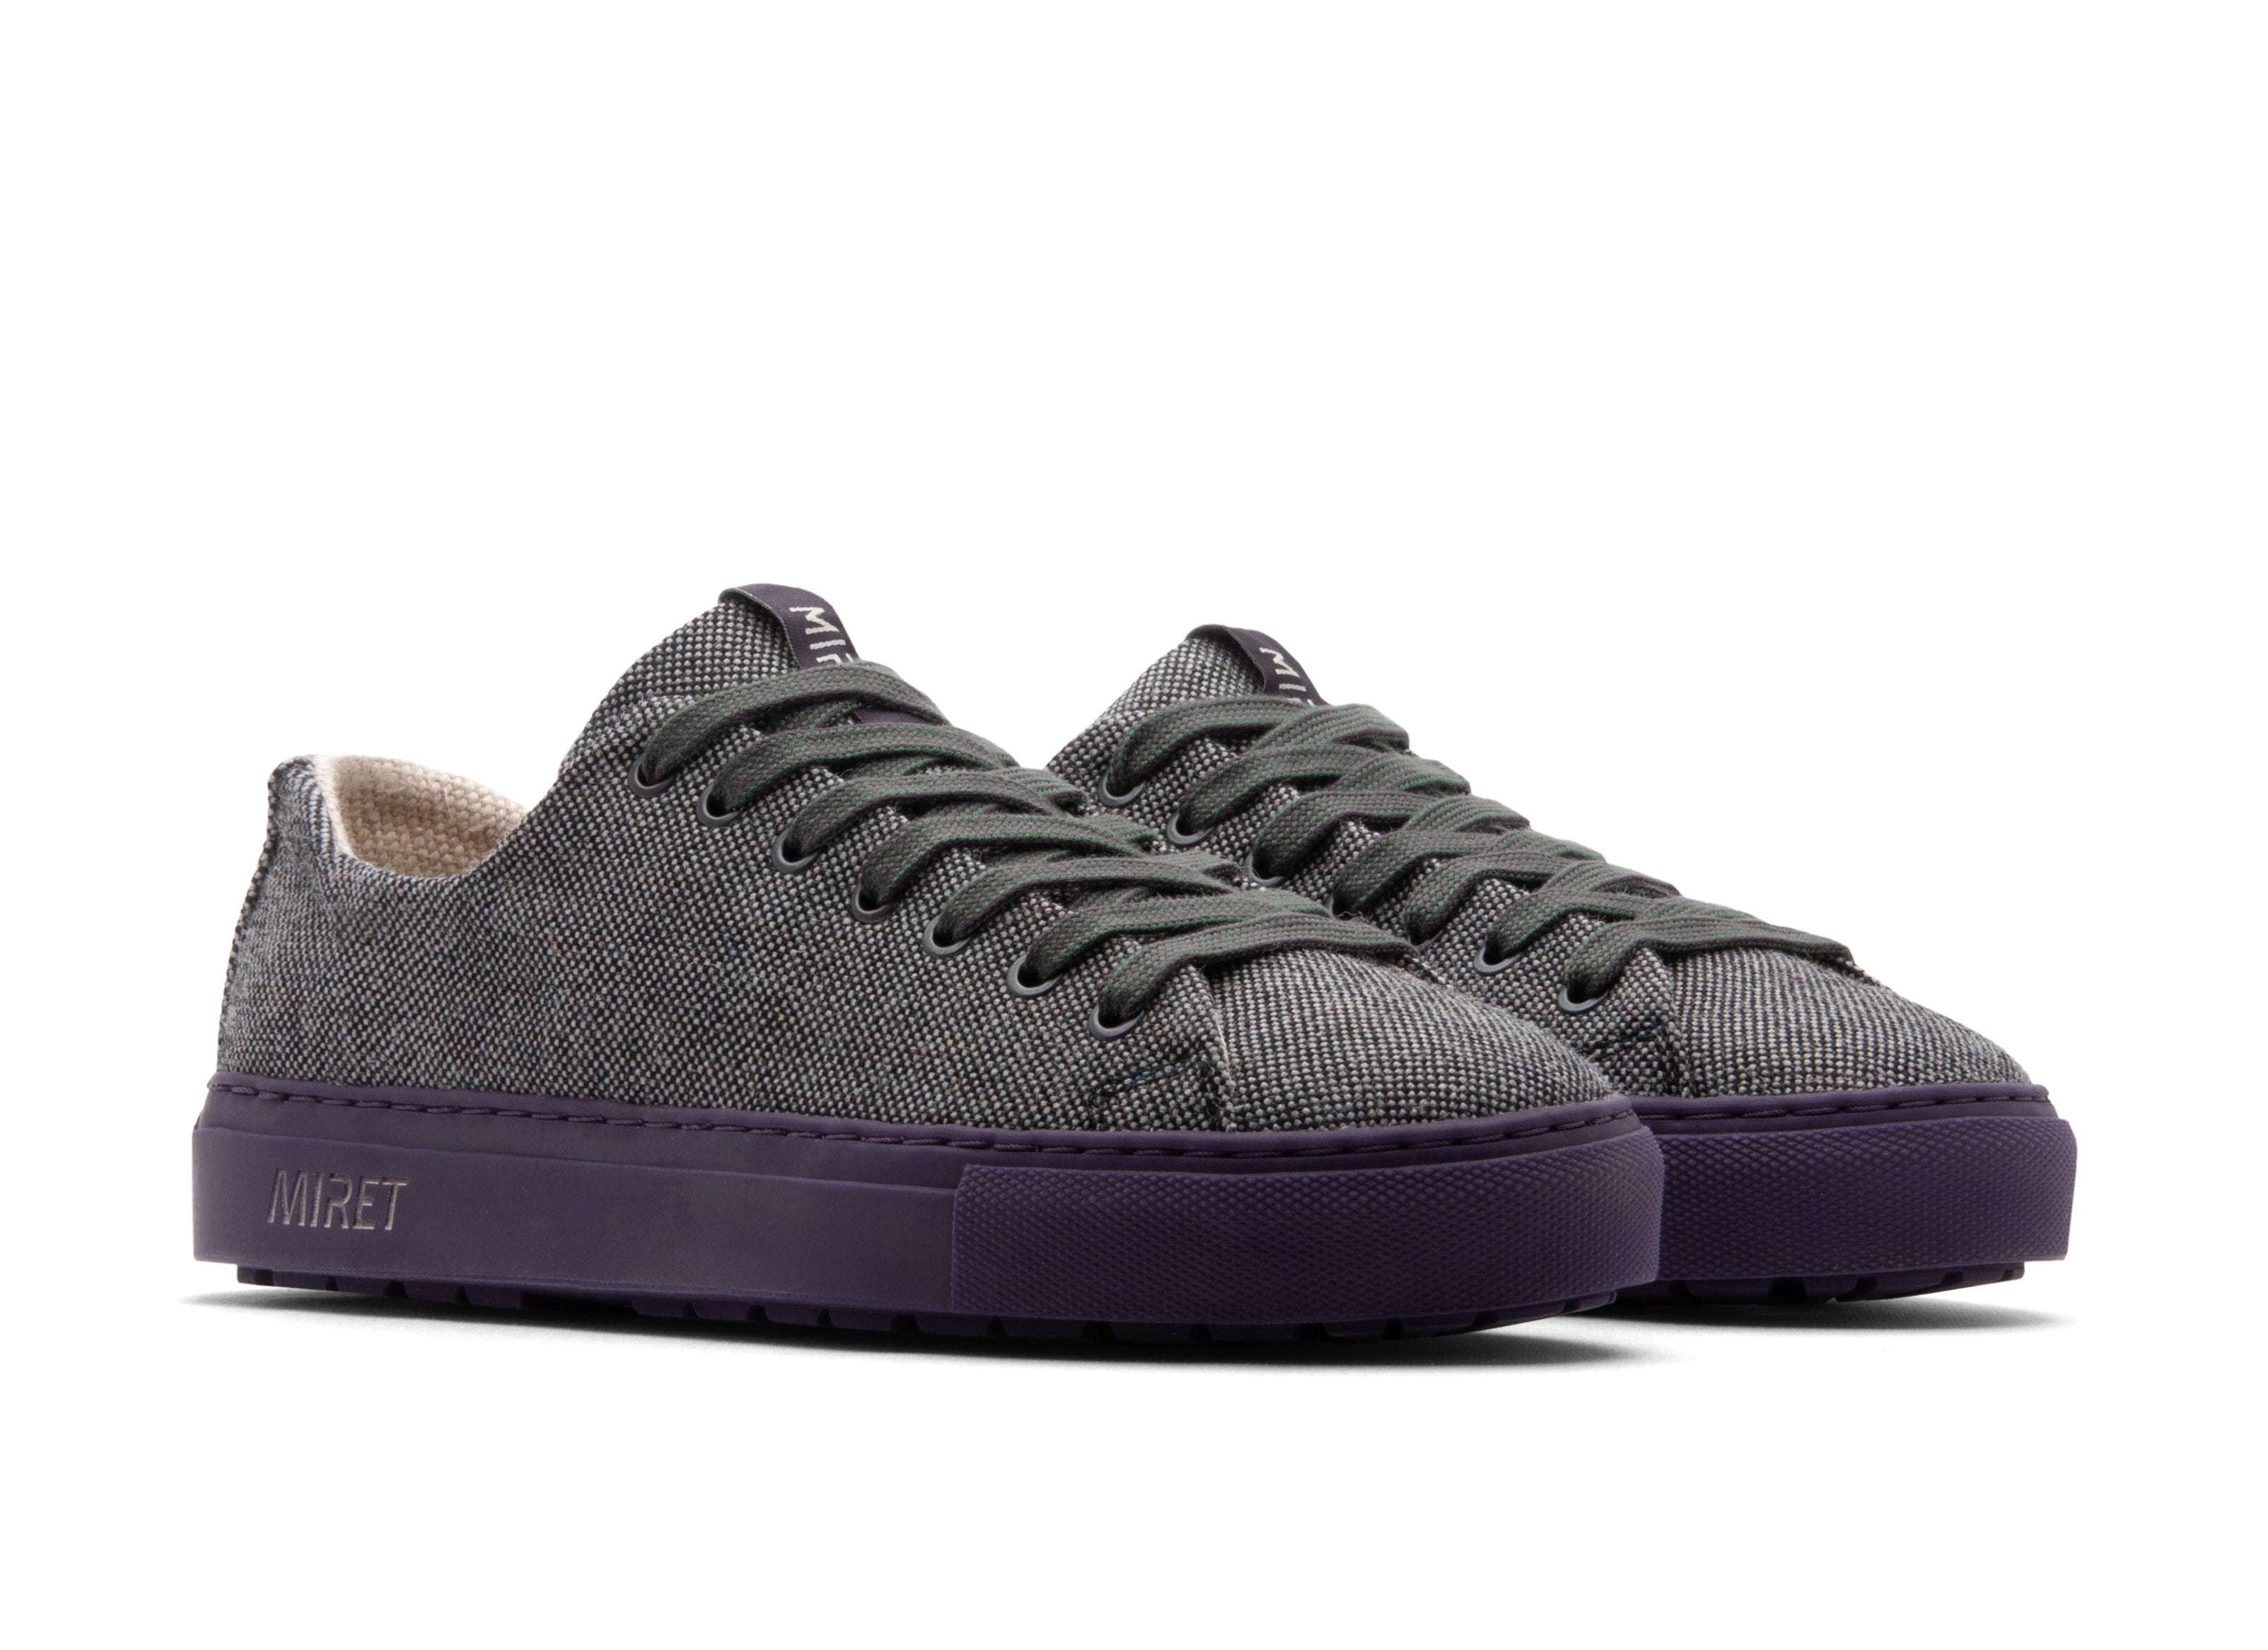 Low-top natural sneakers for winter in the color purple. Made from 100% thermoregulating and water-repellent wool with pure hemp lining, wool-covered cork insoles and rubber outsoles with deeper grooves for improved grip. OEKO-TEX certified sneakers manufactured in the EU.